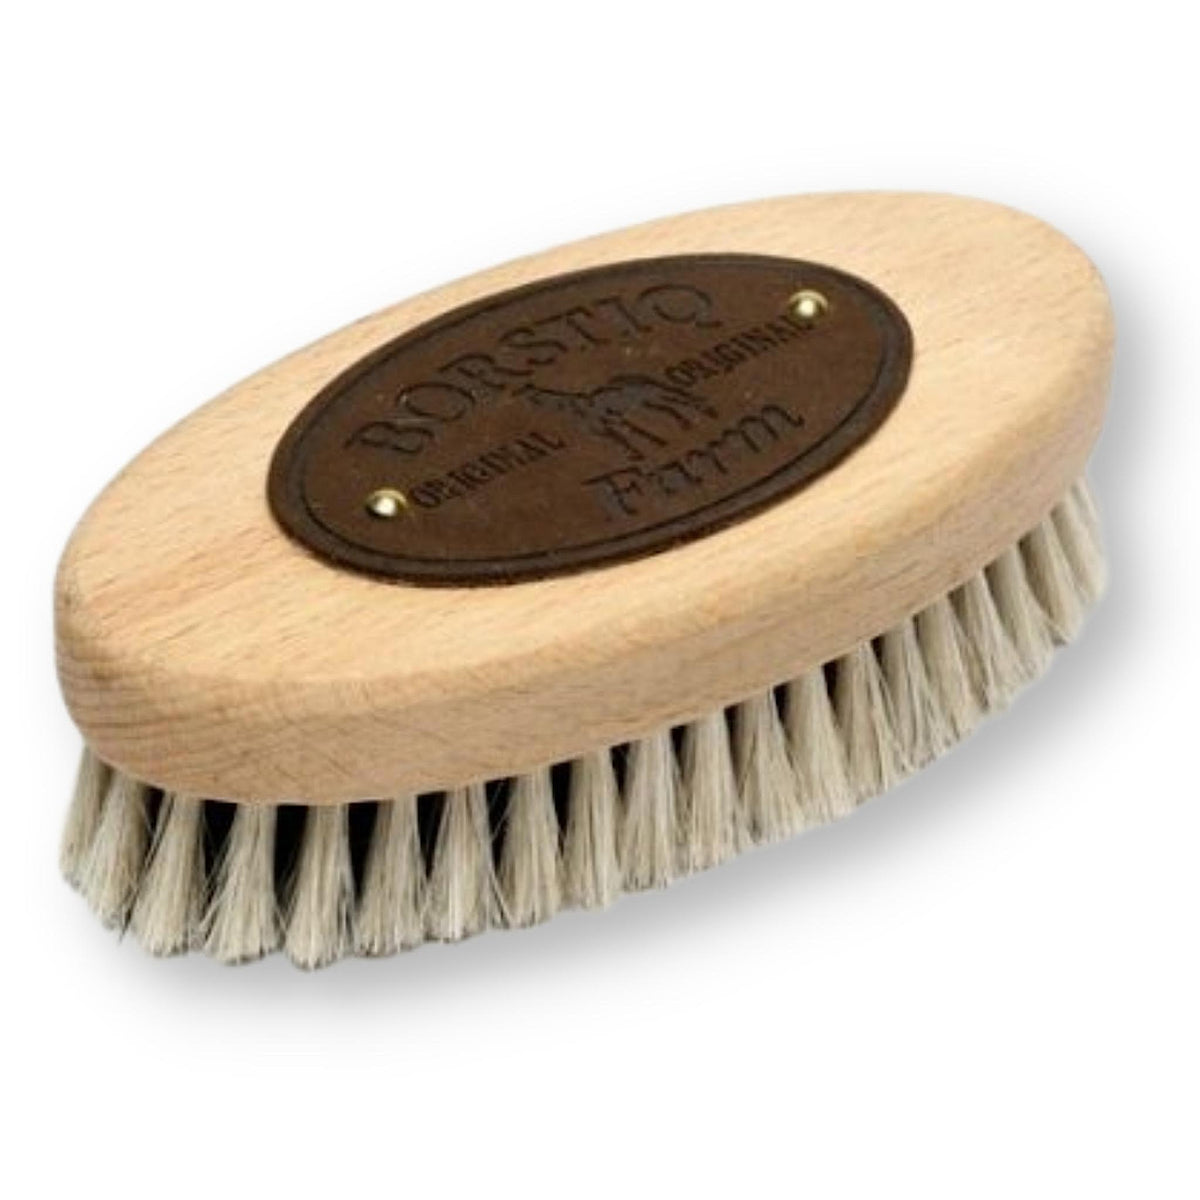 Small oval shaped brush with wooden handle and leather logo.